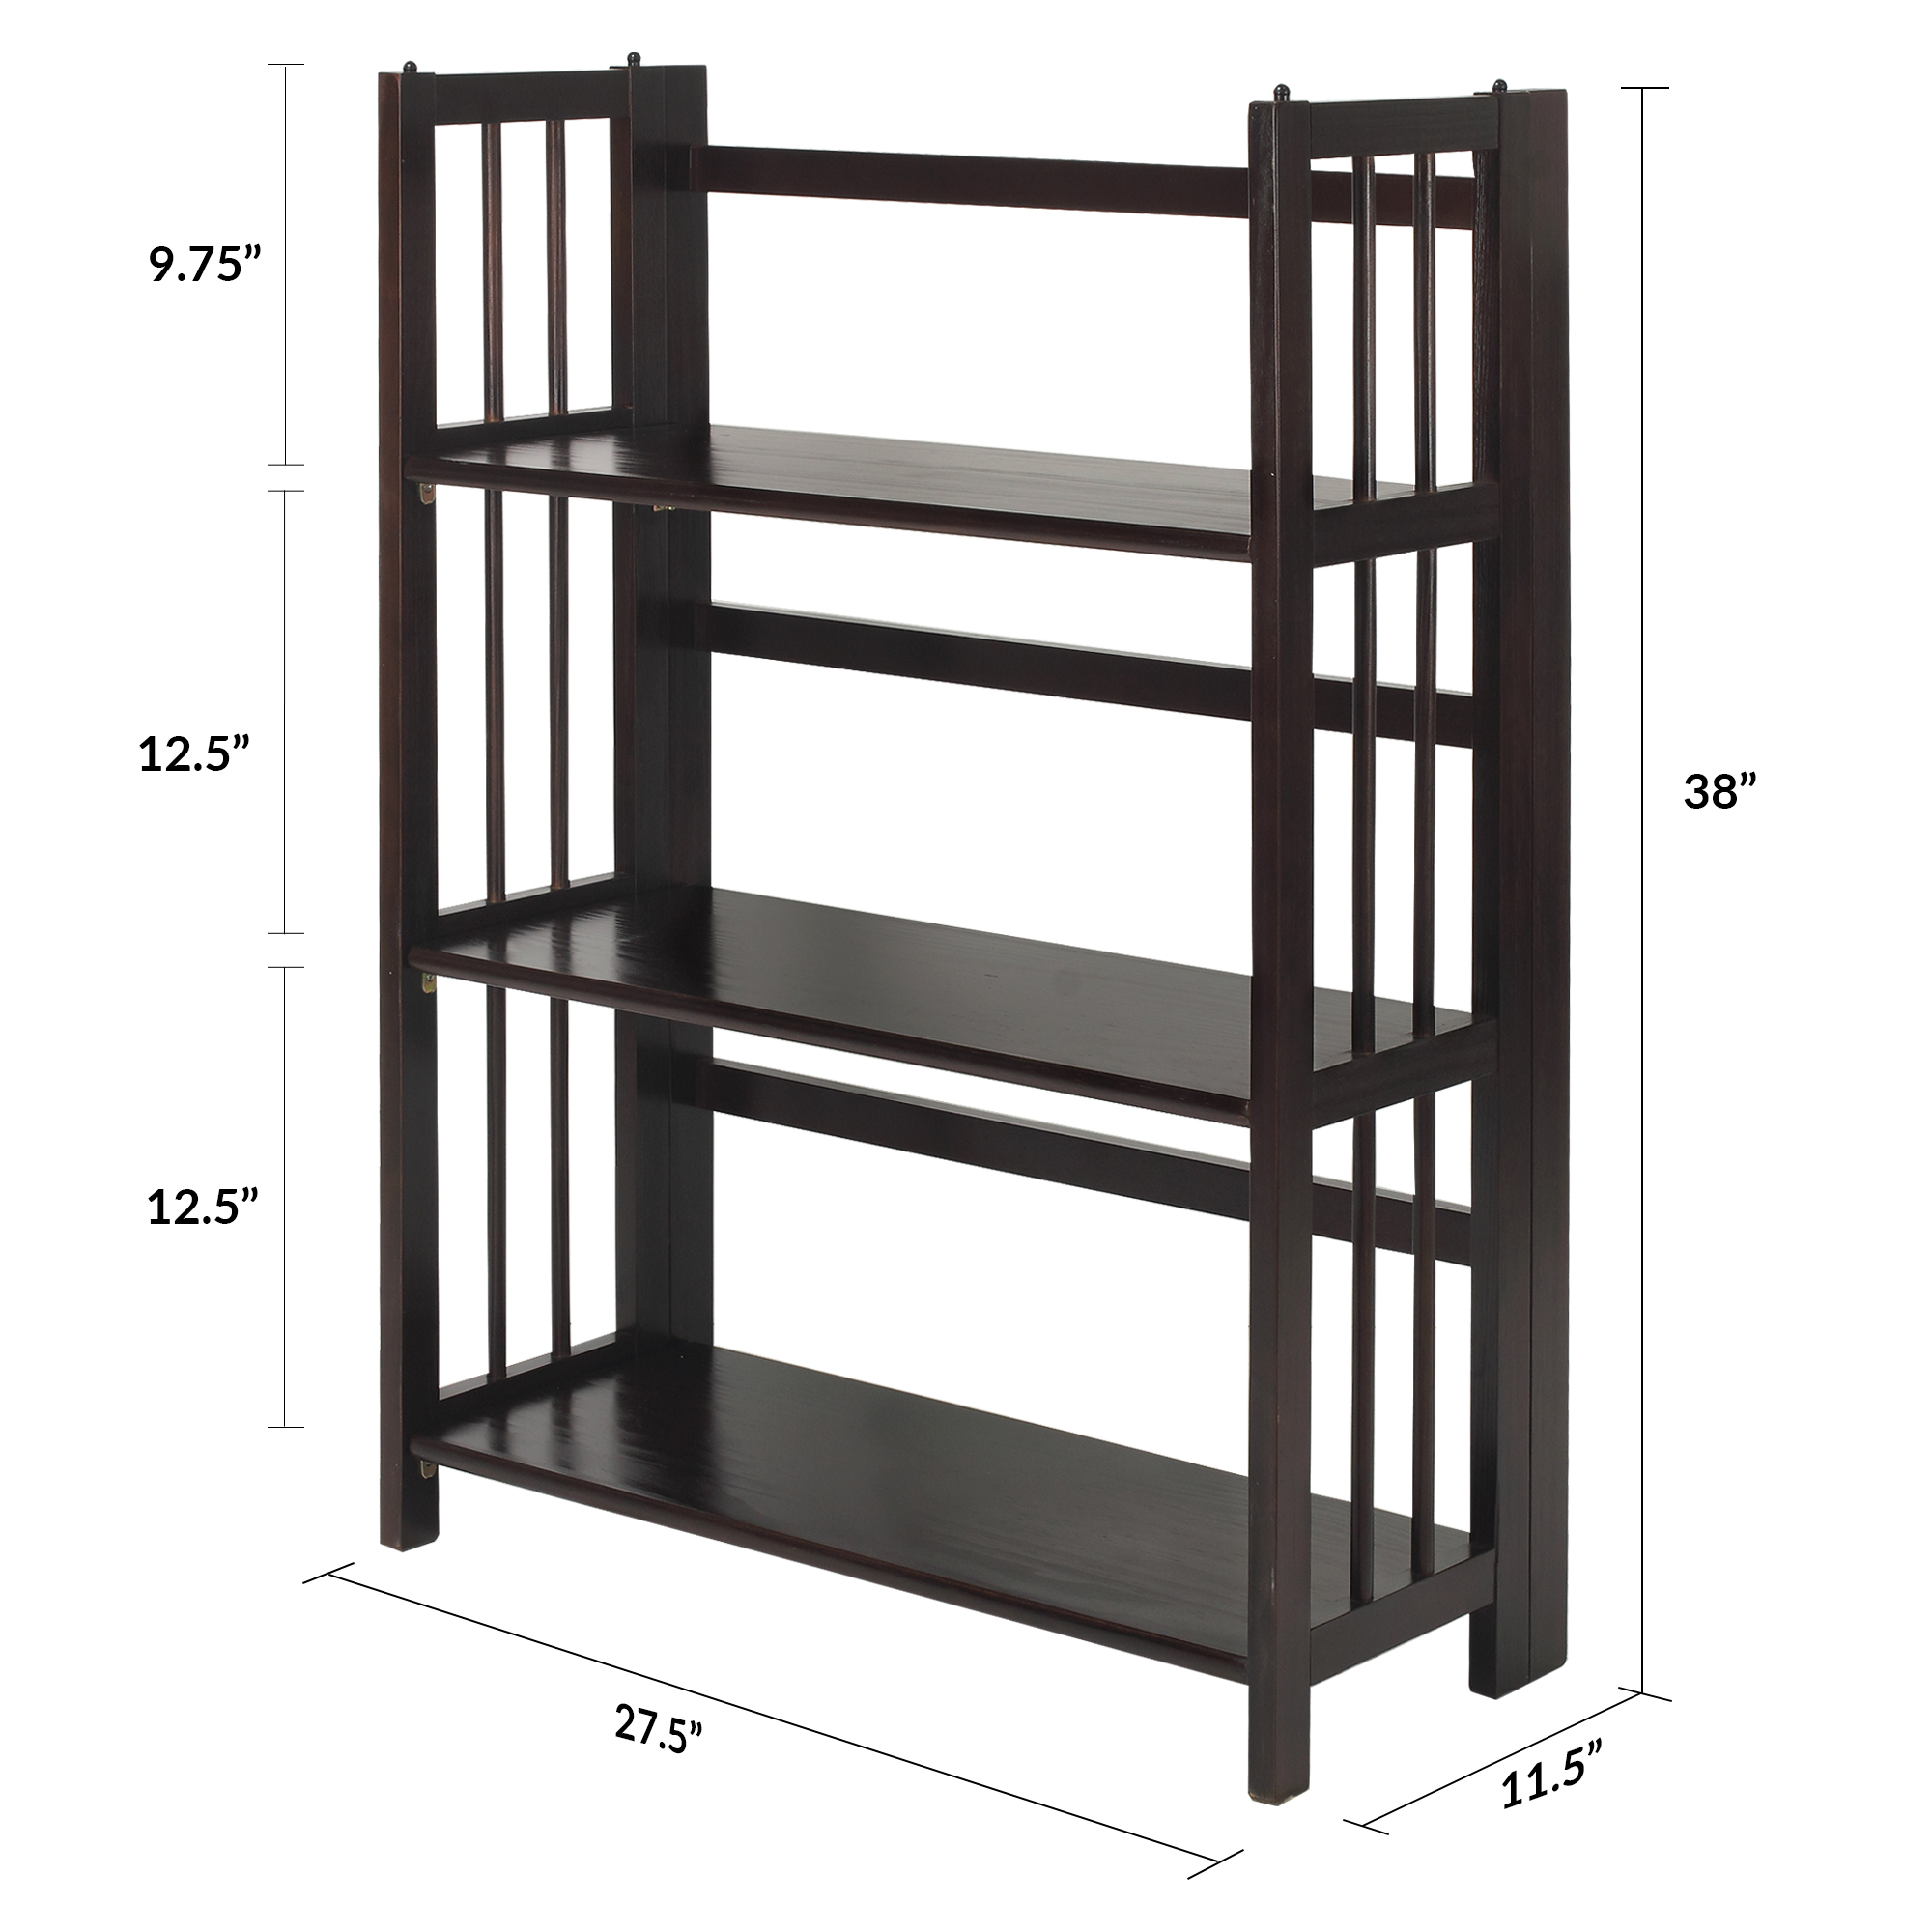 3-Shelf Folding Stackable Bookcase (27.5″ Wide) - Casual Home